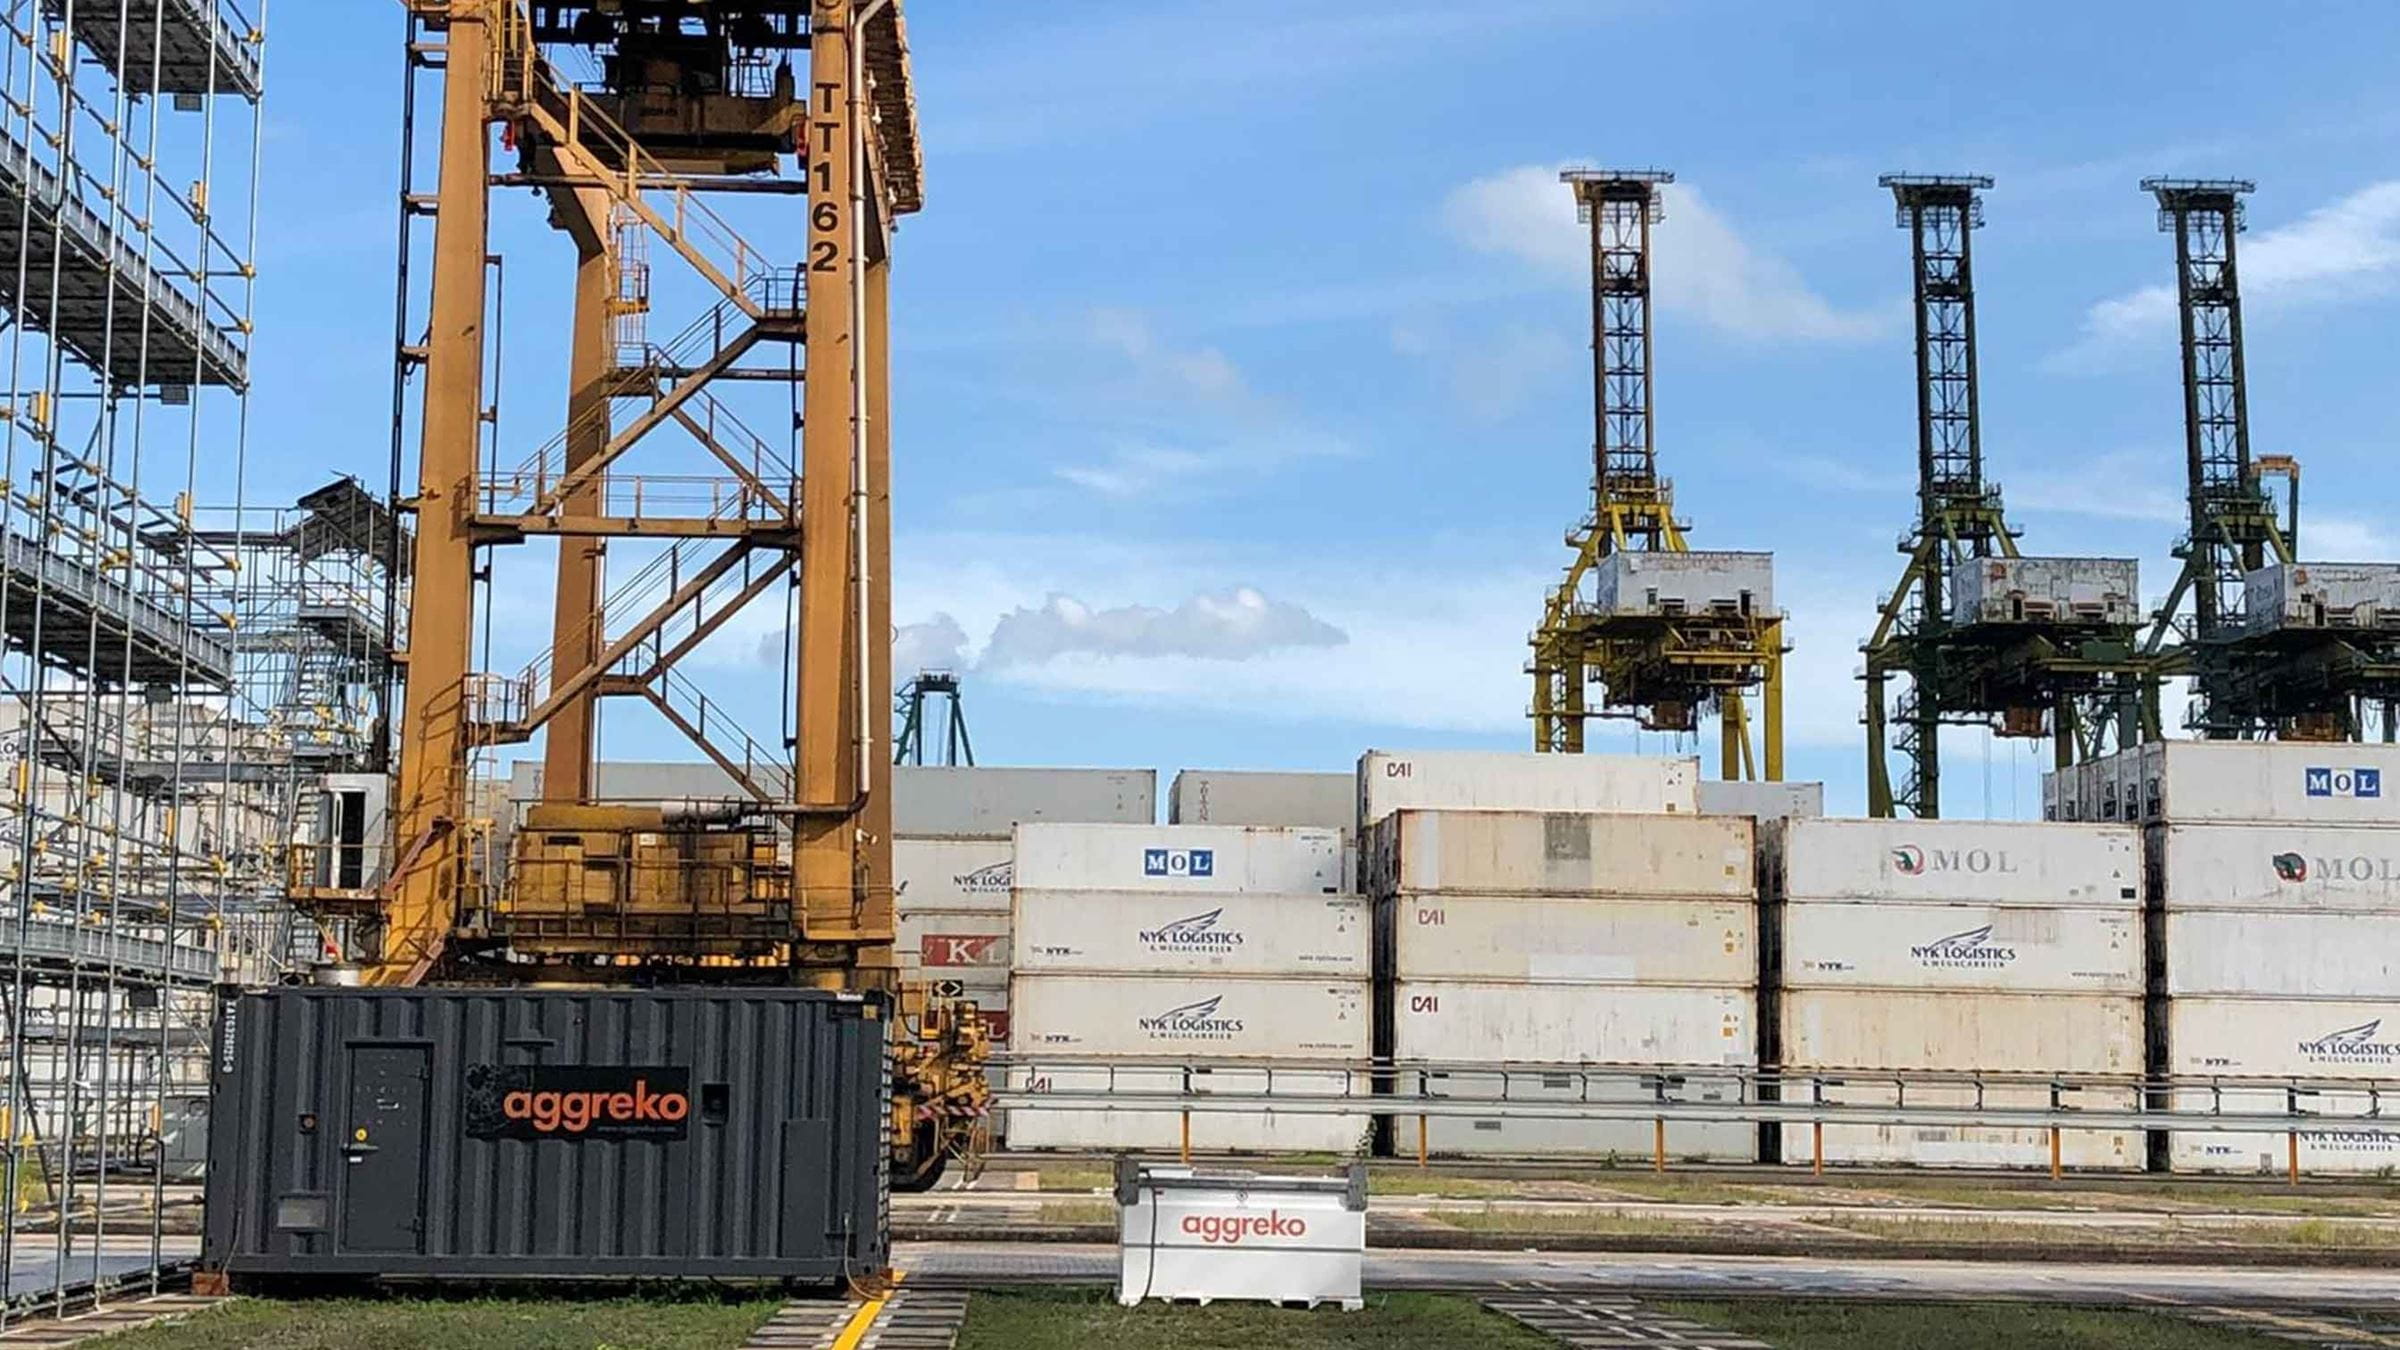 Aggreko generator with containers in the background and a crane at the docks